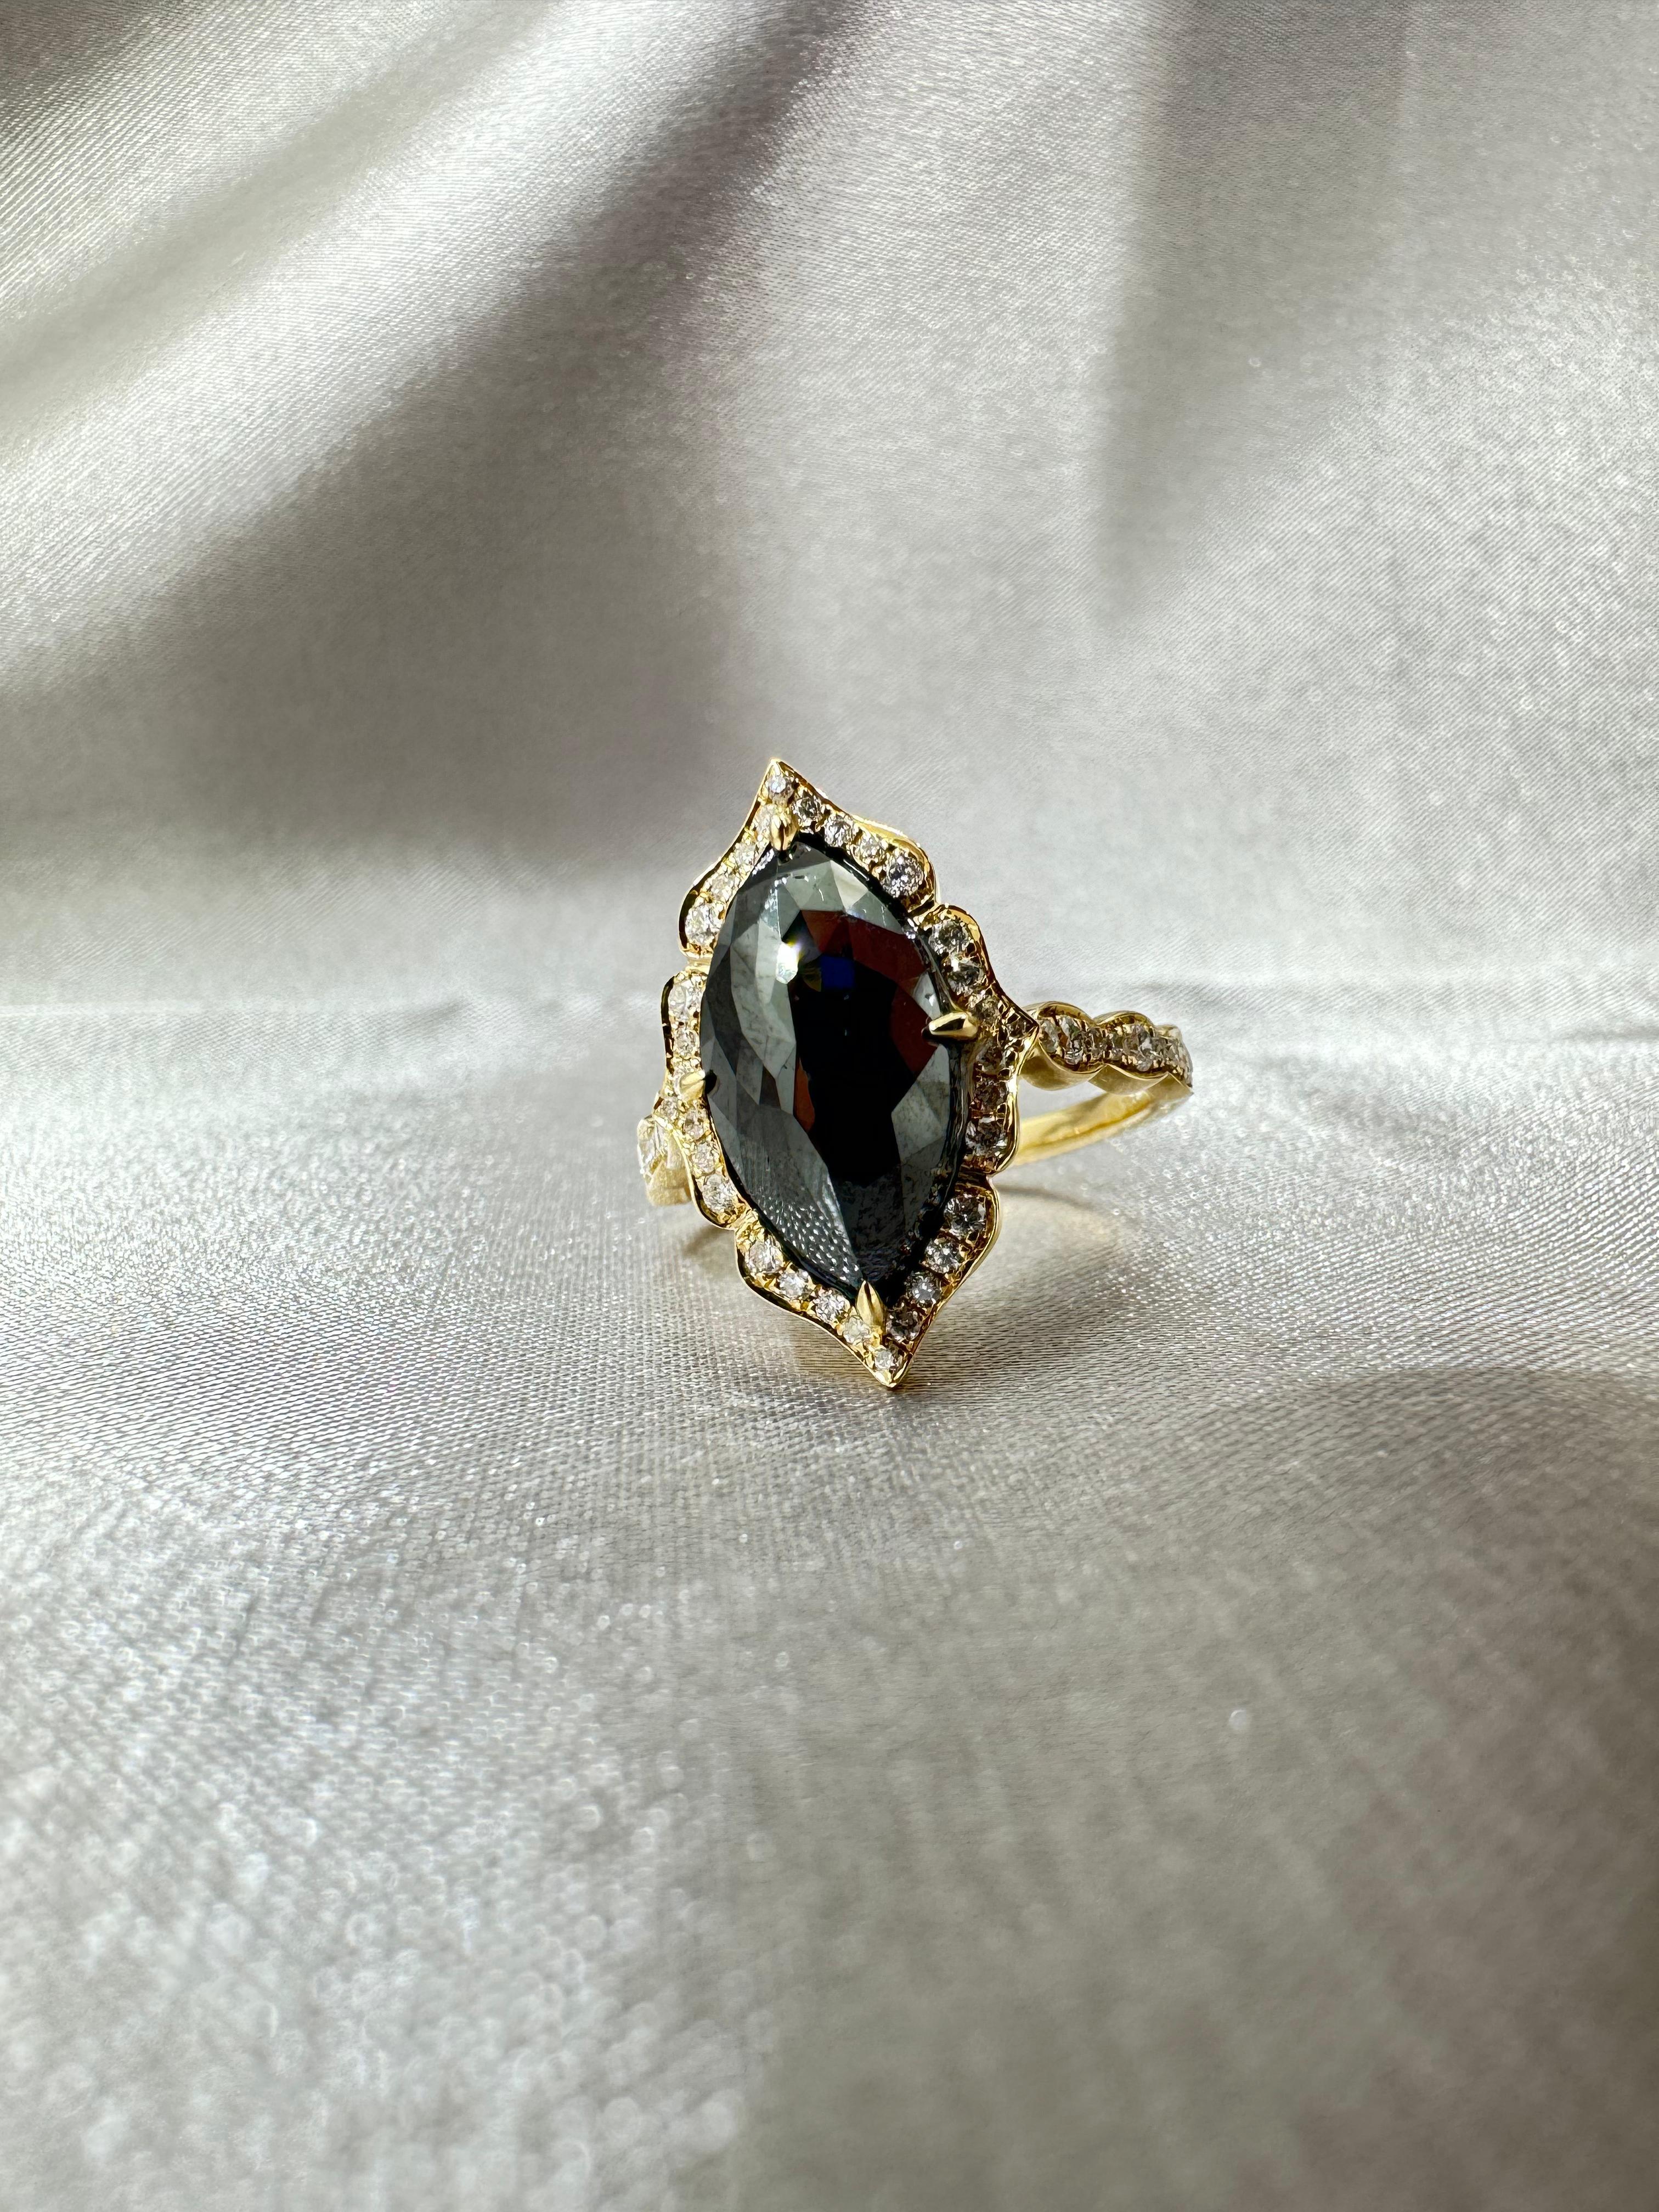 Indulge in the unparalleled beauty of this 14K yellow gold ring, boasting an IGI certified 3.63 carat black diamond. This majestic centerpiece captivates with its profound depth and intriguing allure, making it an instant symbol of